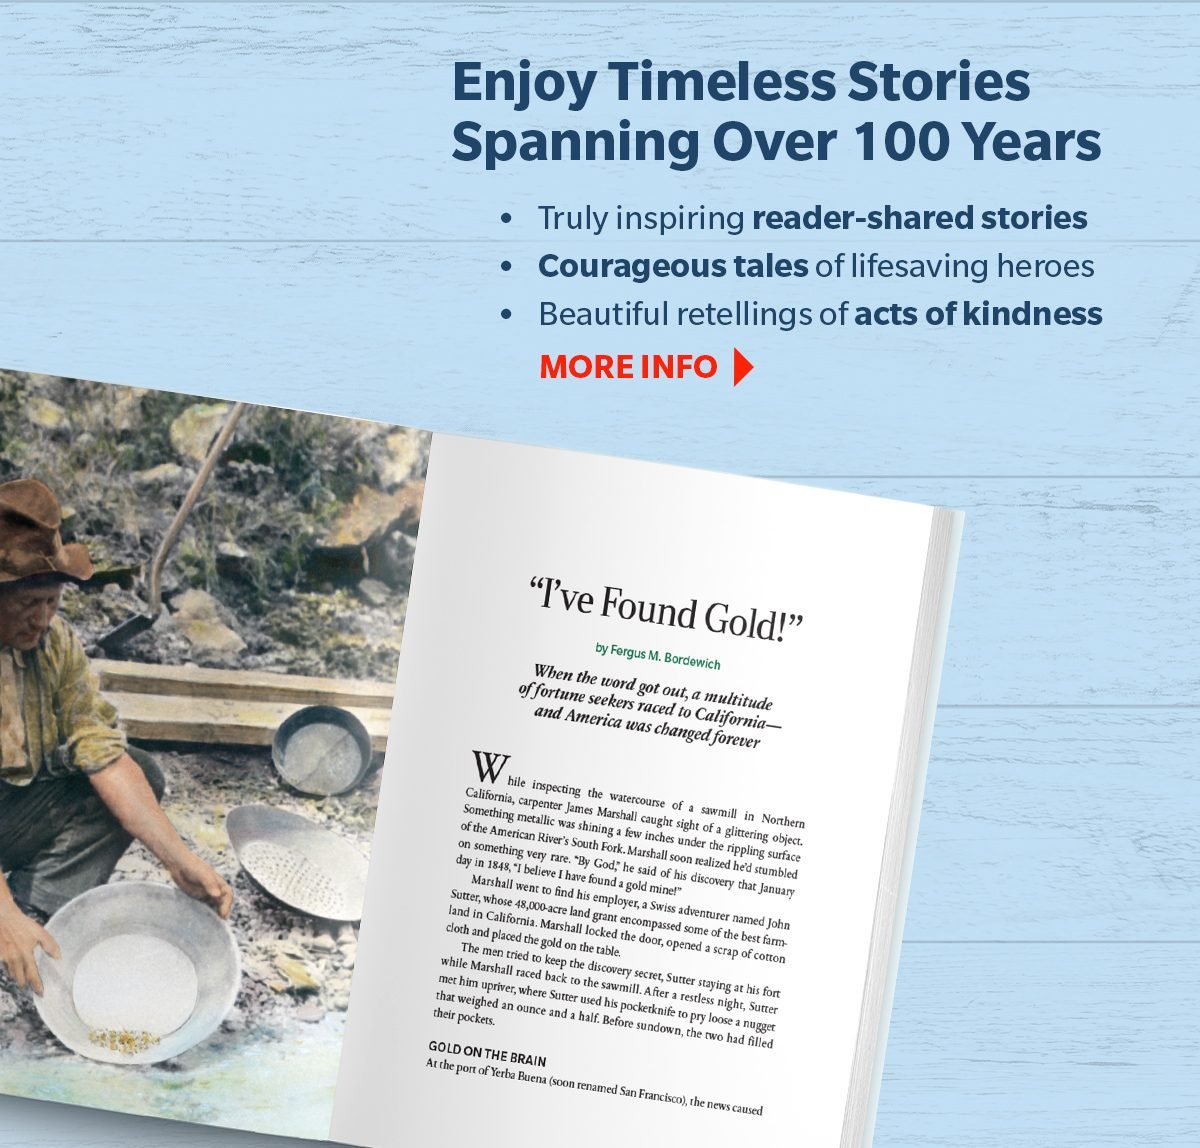 Enjoy Timeless Stories Spanning over 100 Years